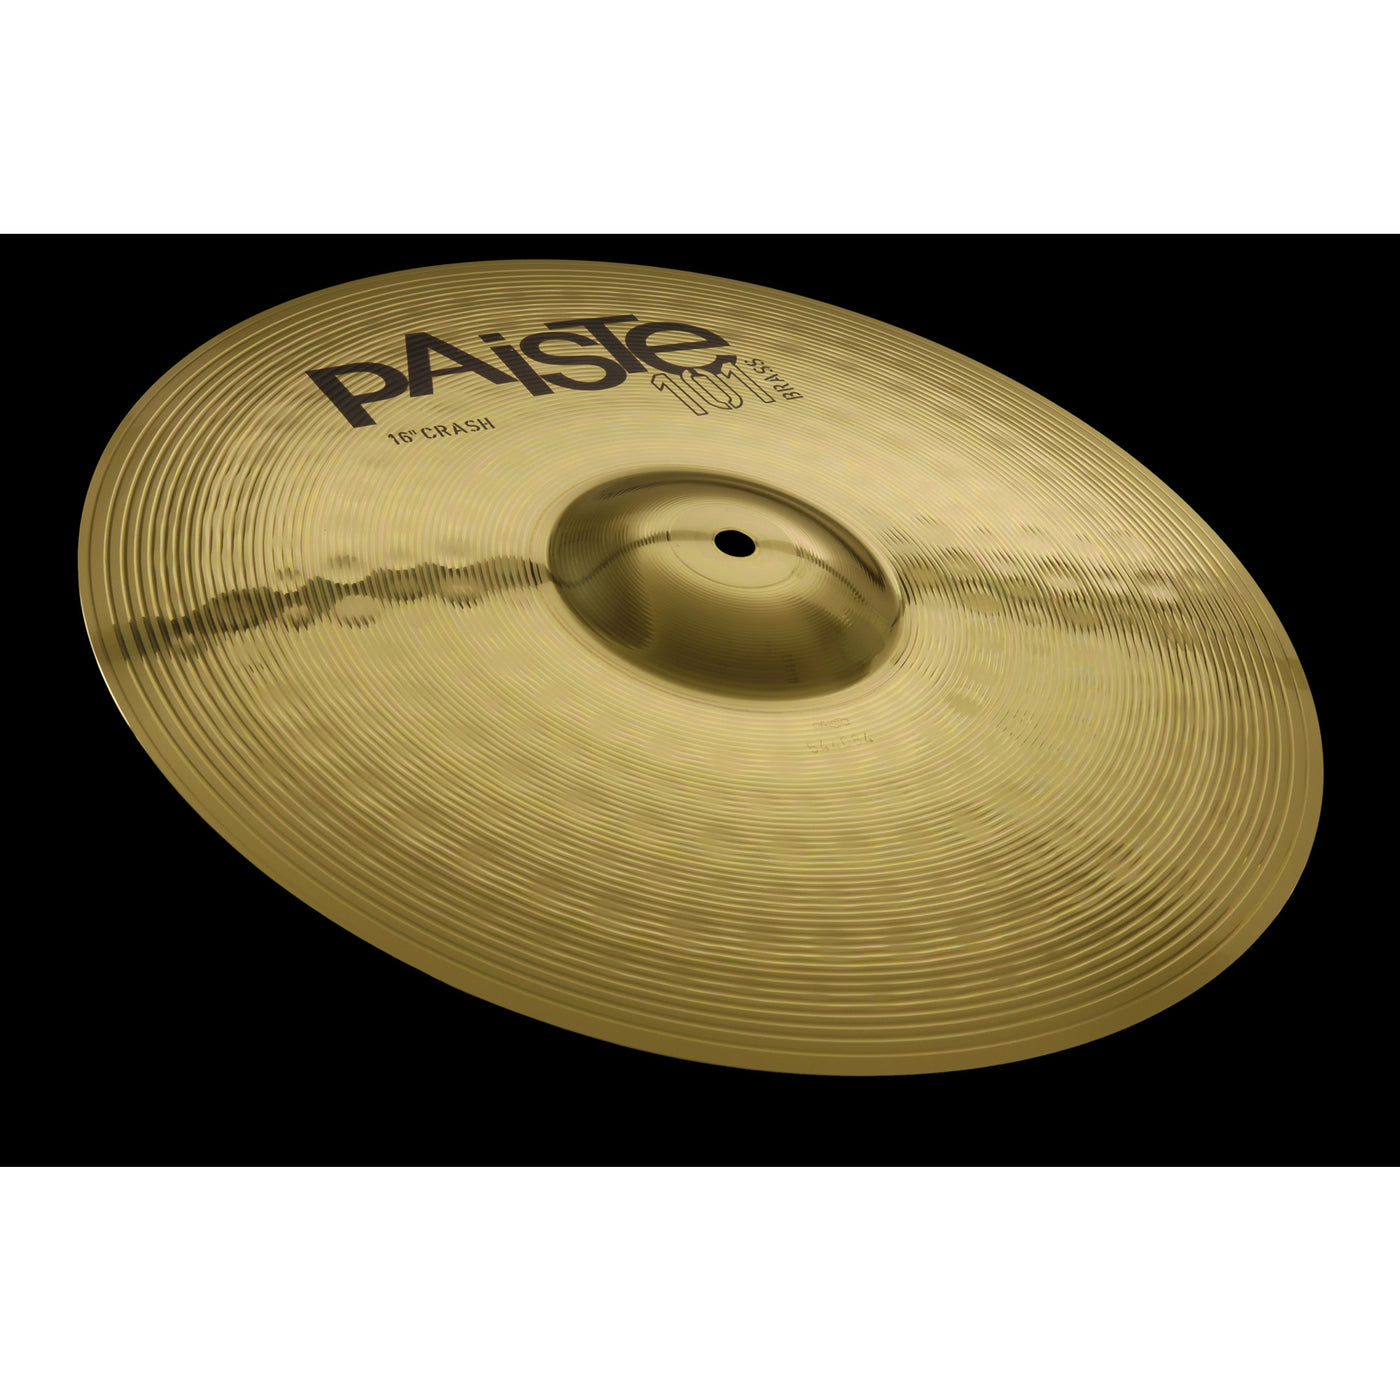 Paiste Crash Cymbal, 101 Brass Series, Percussion Instrument for Drums, 16"